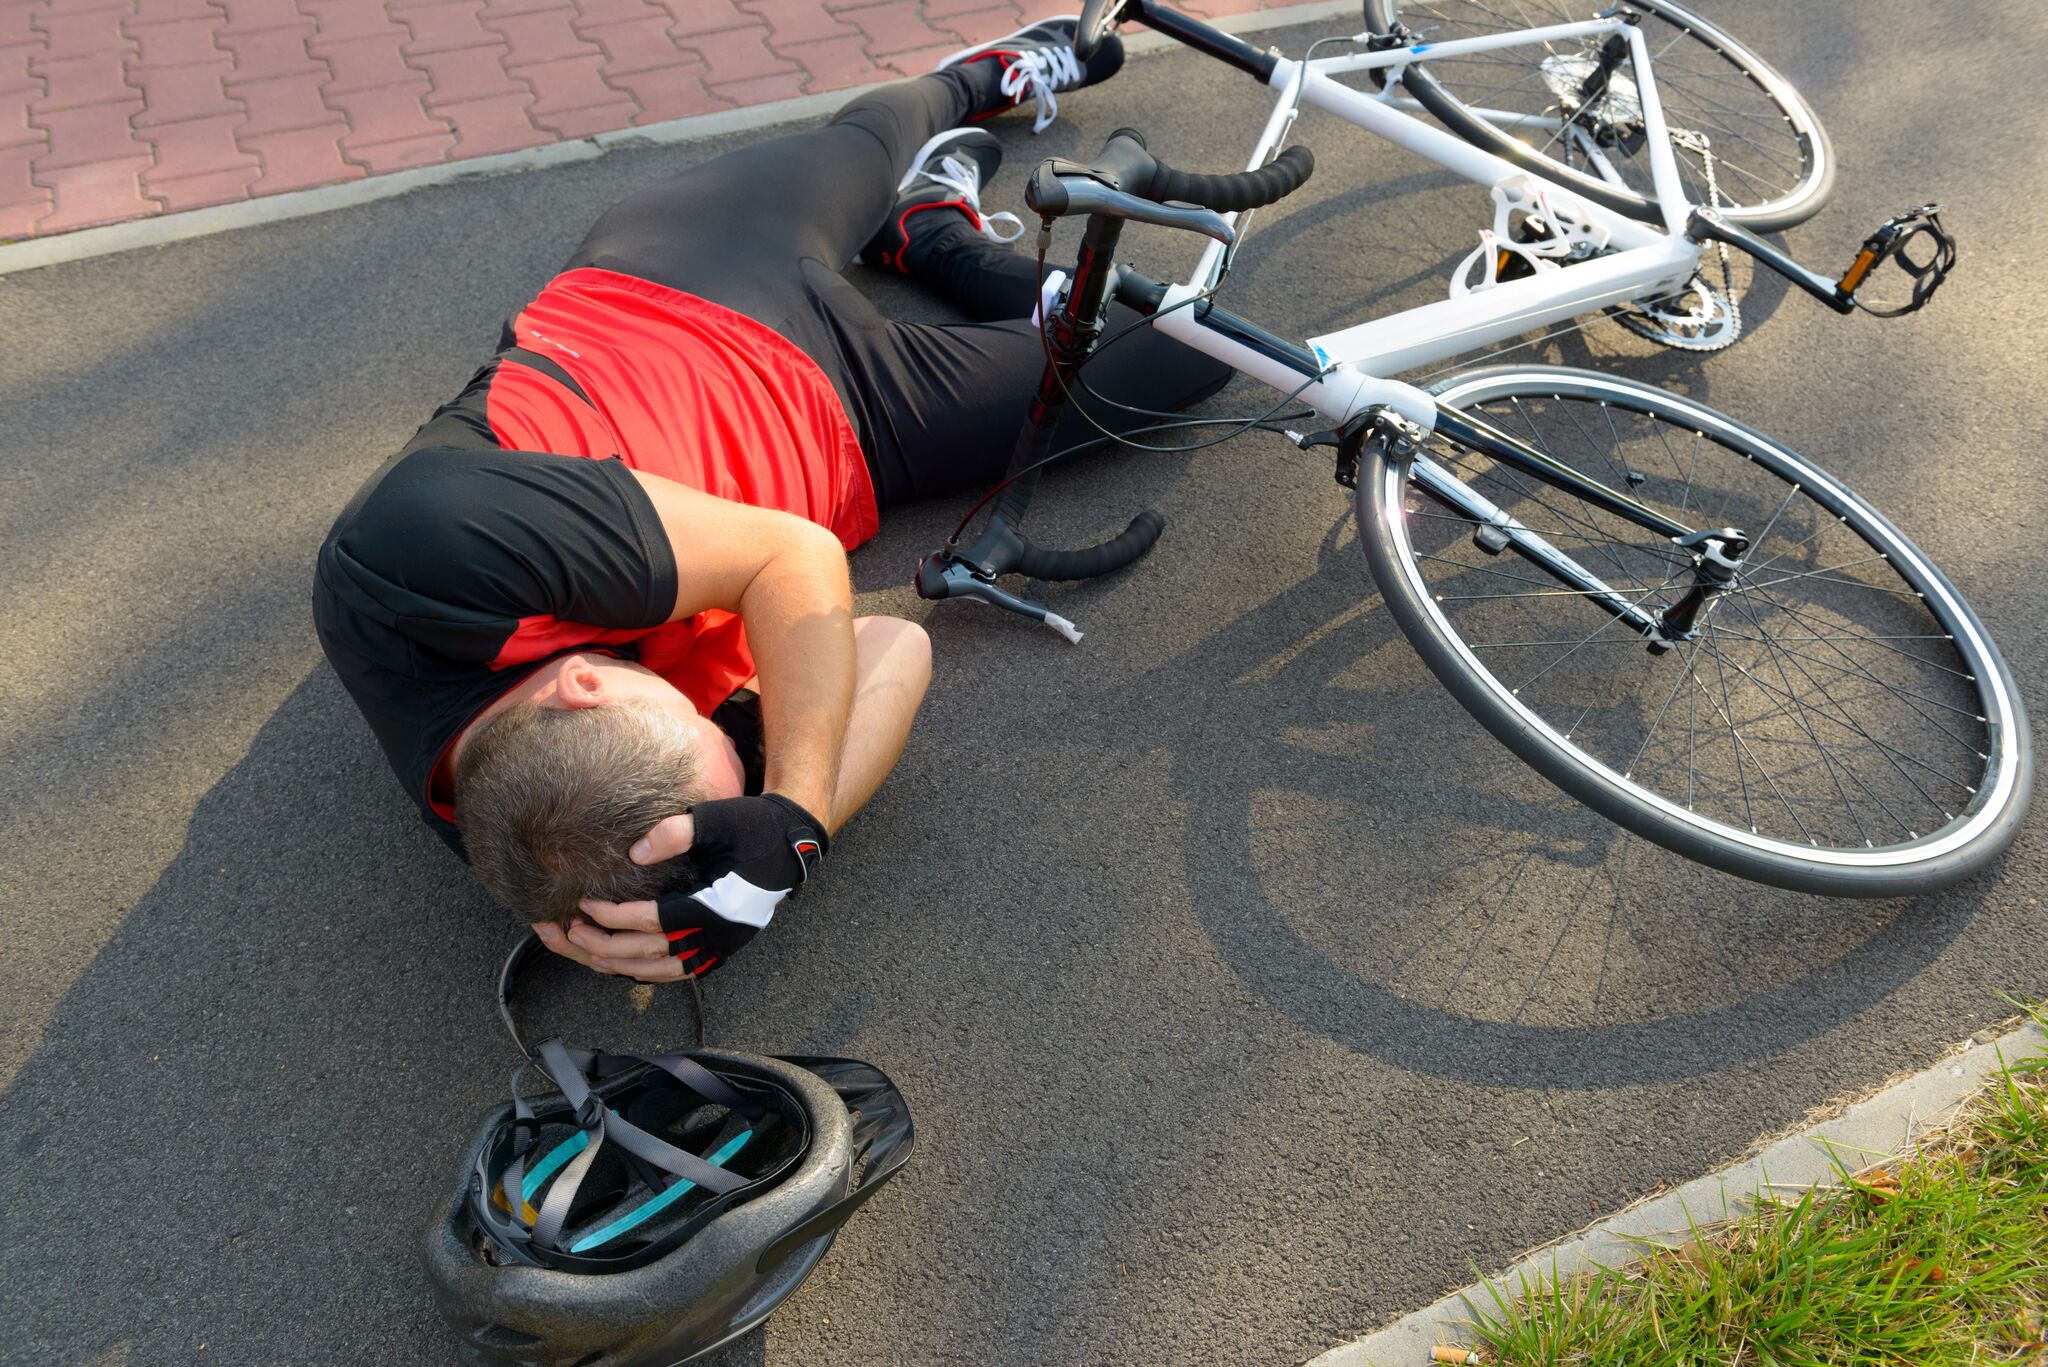 How Should You Respond to a Hit-and-Run Bicycle Accident?